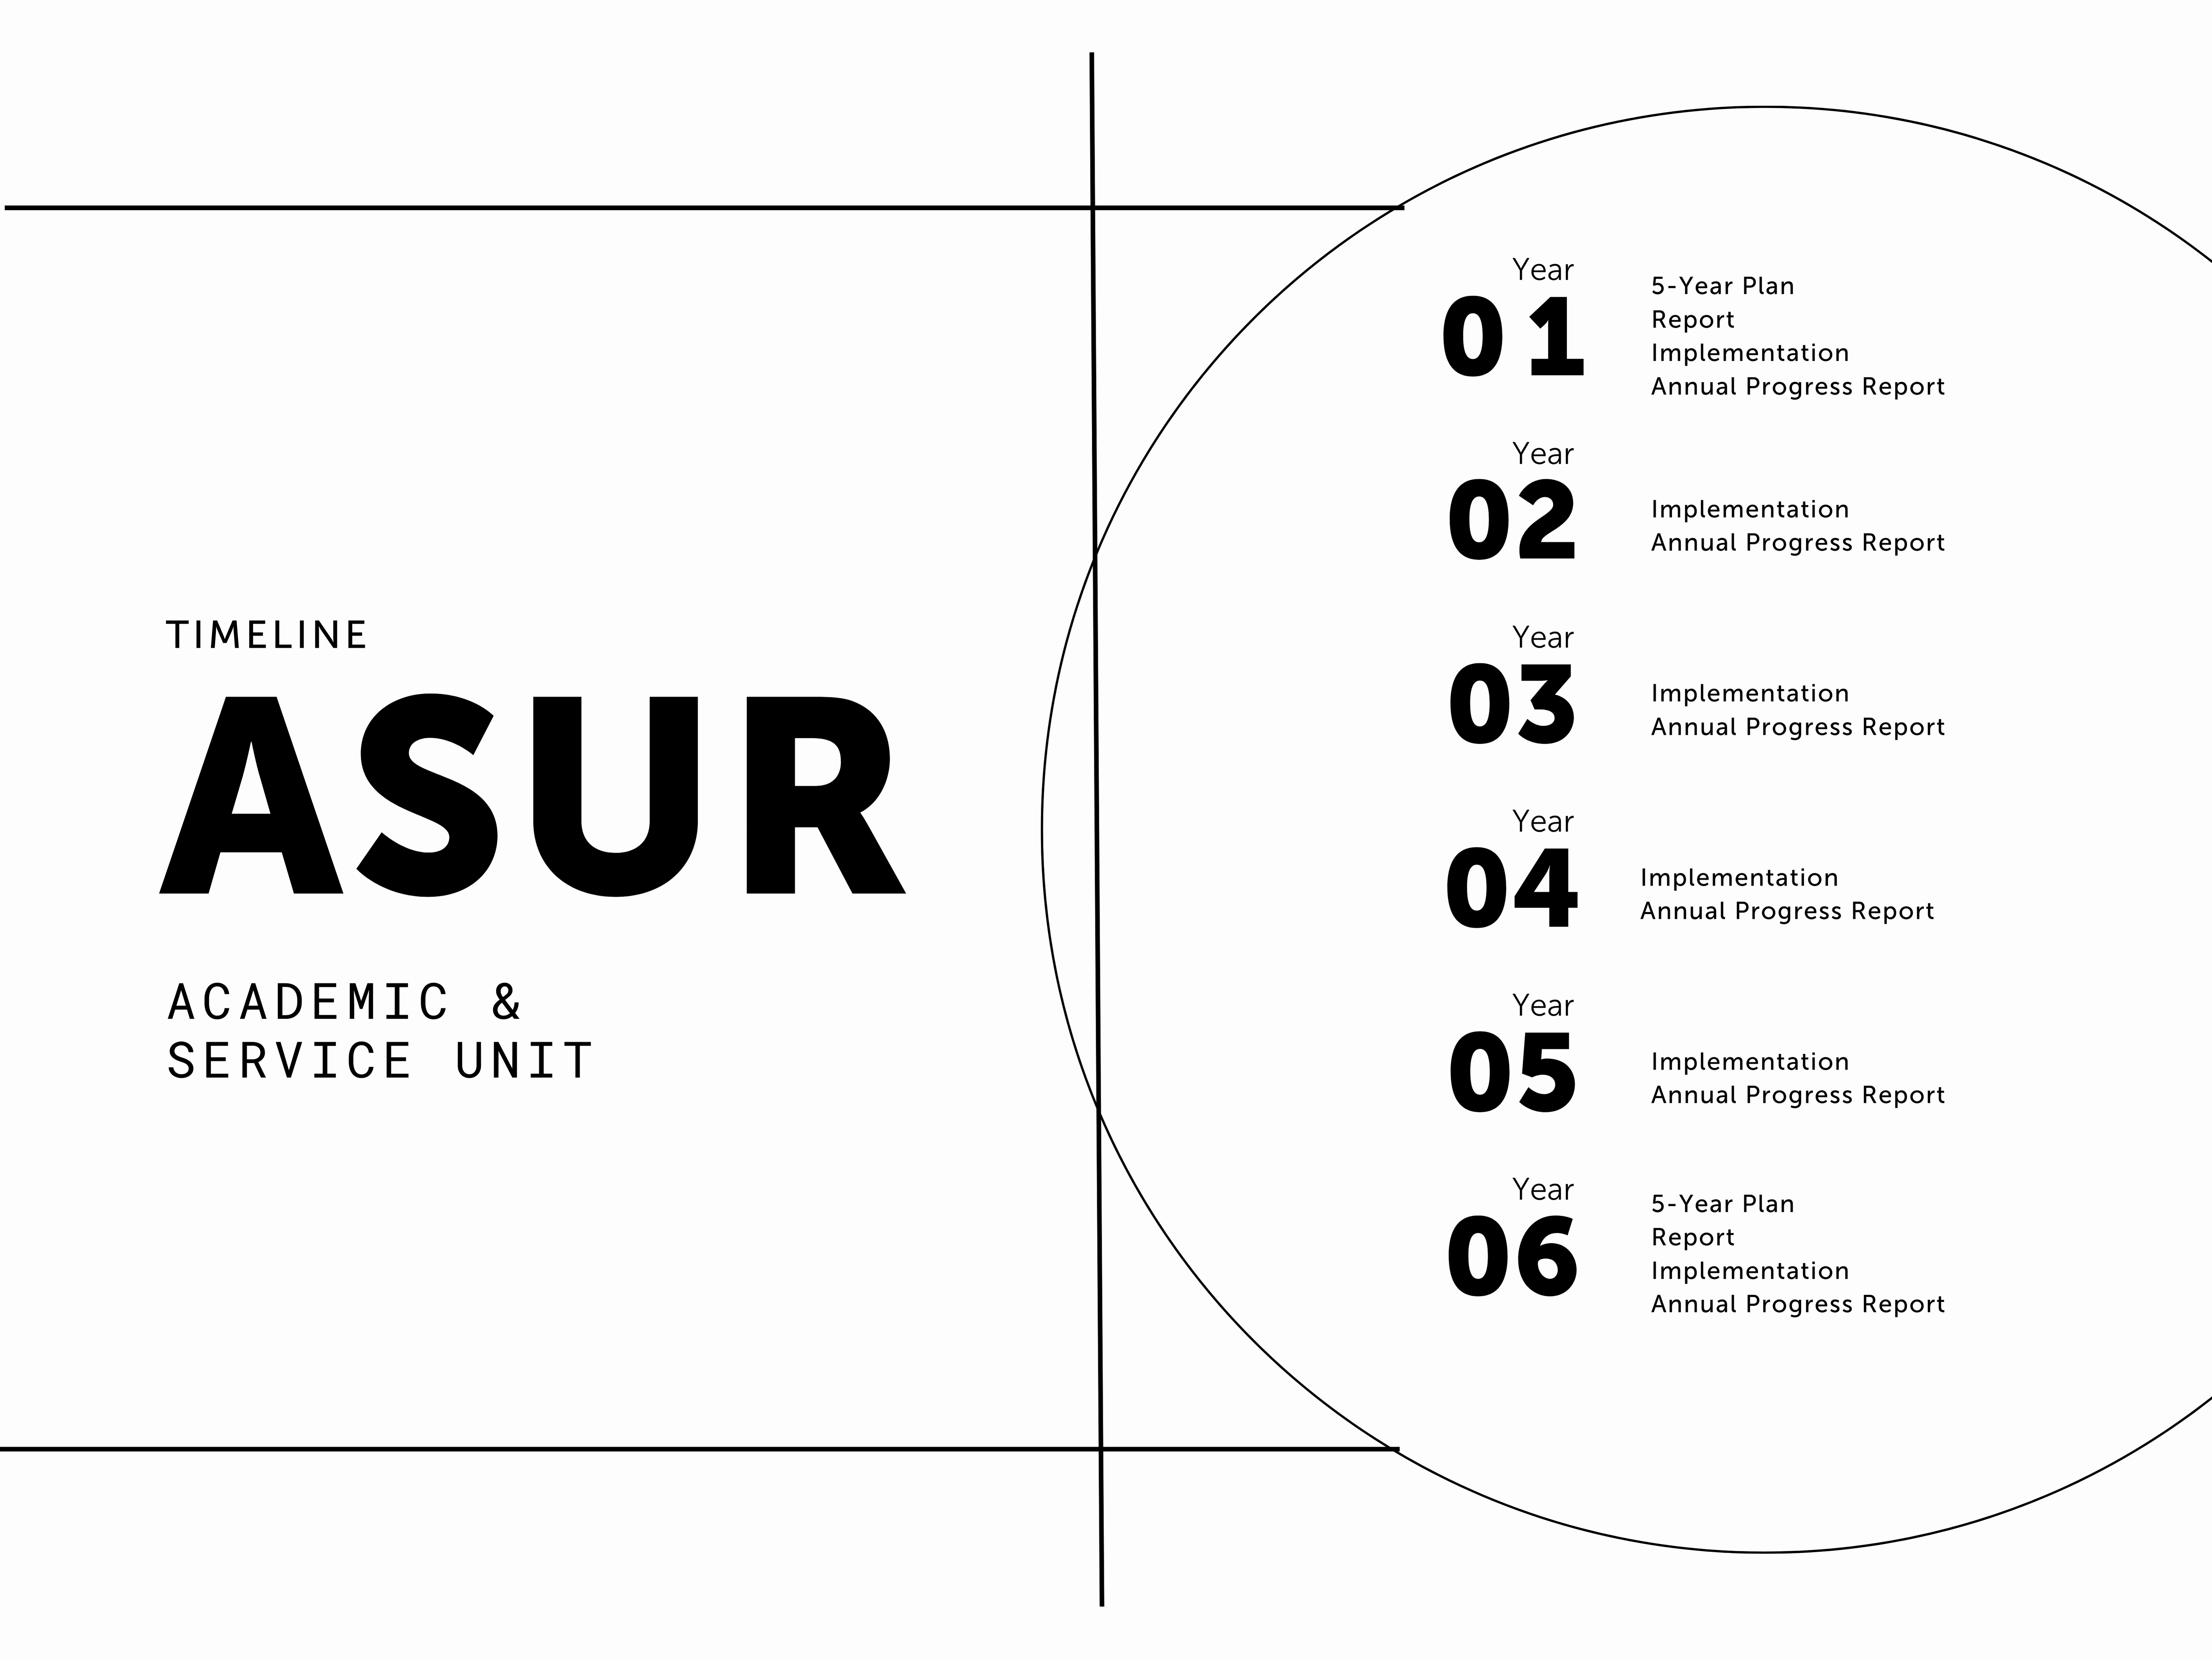 ASUR Graphic that details the 6 year timeline